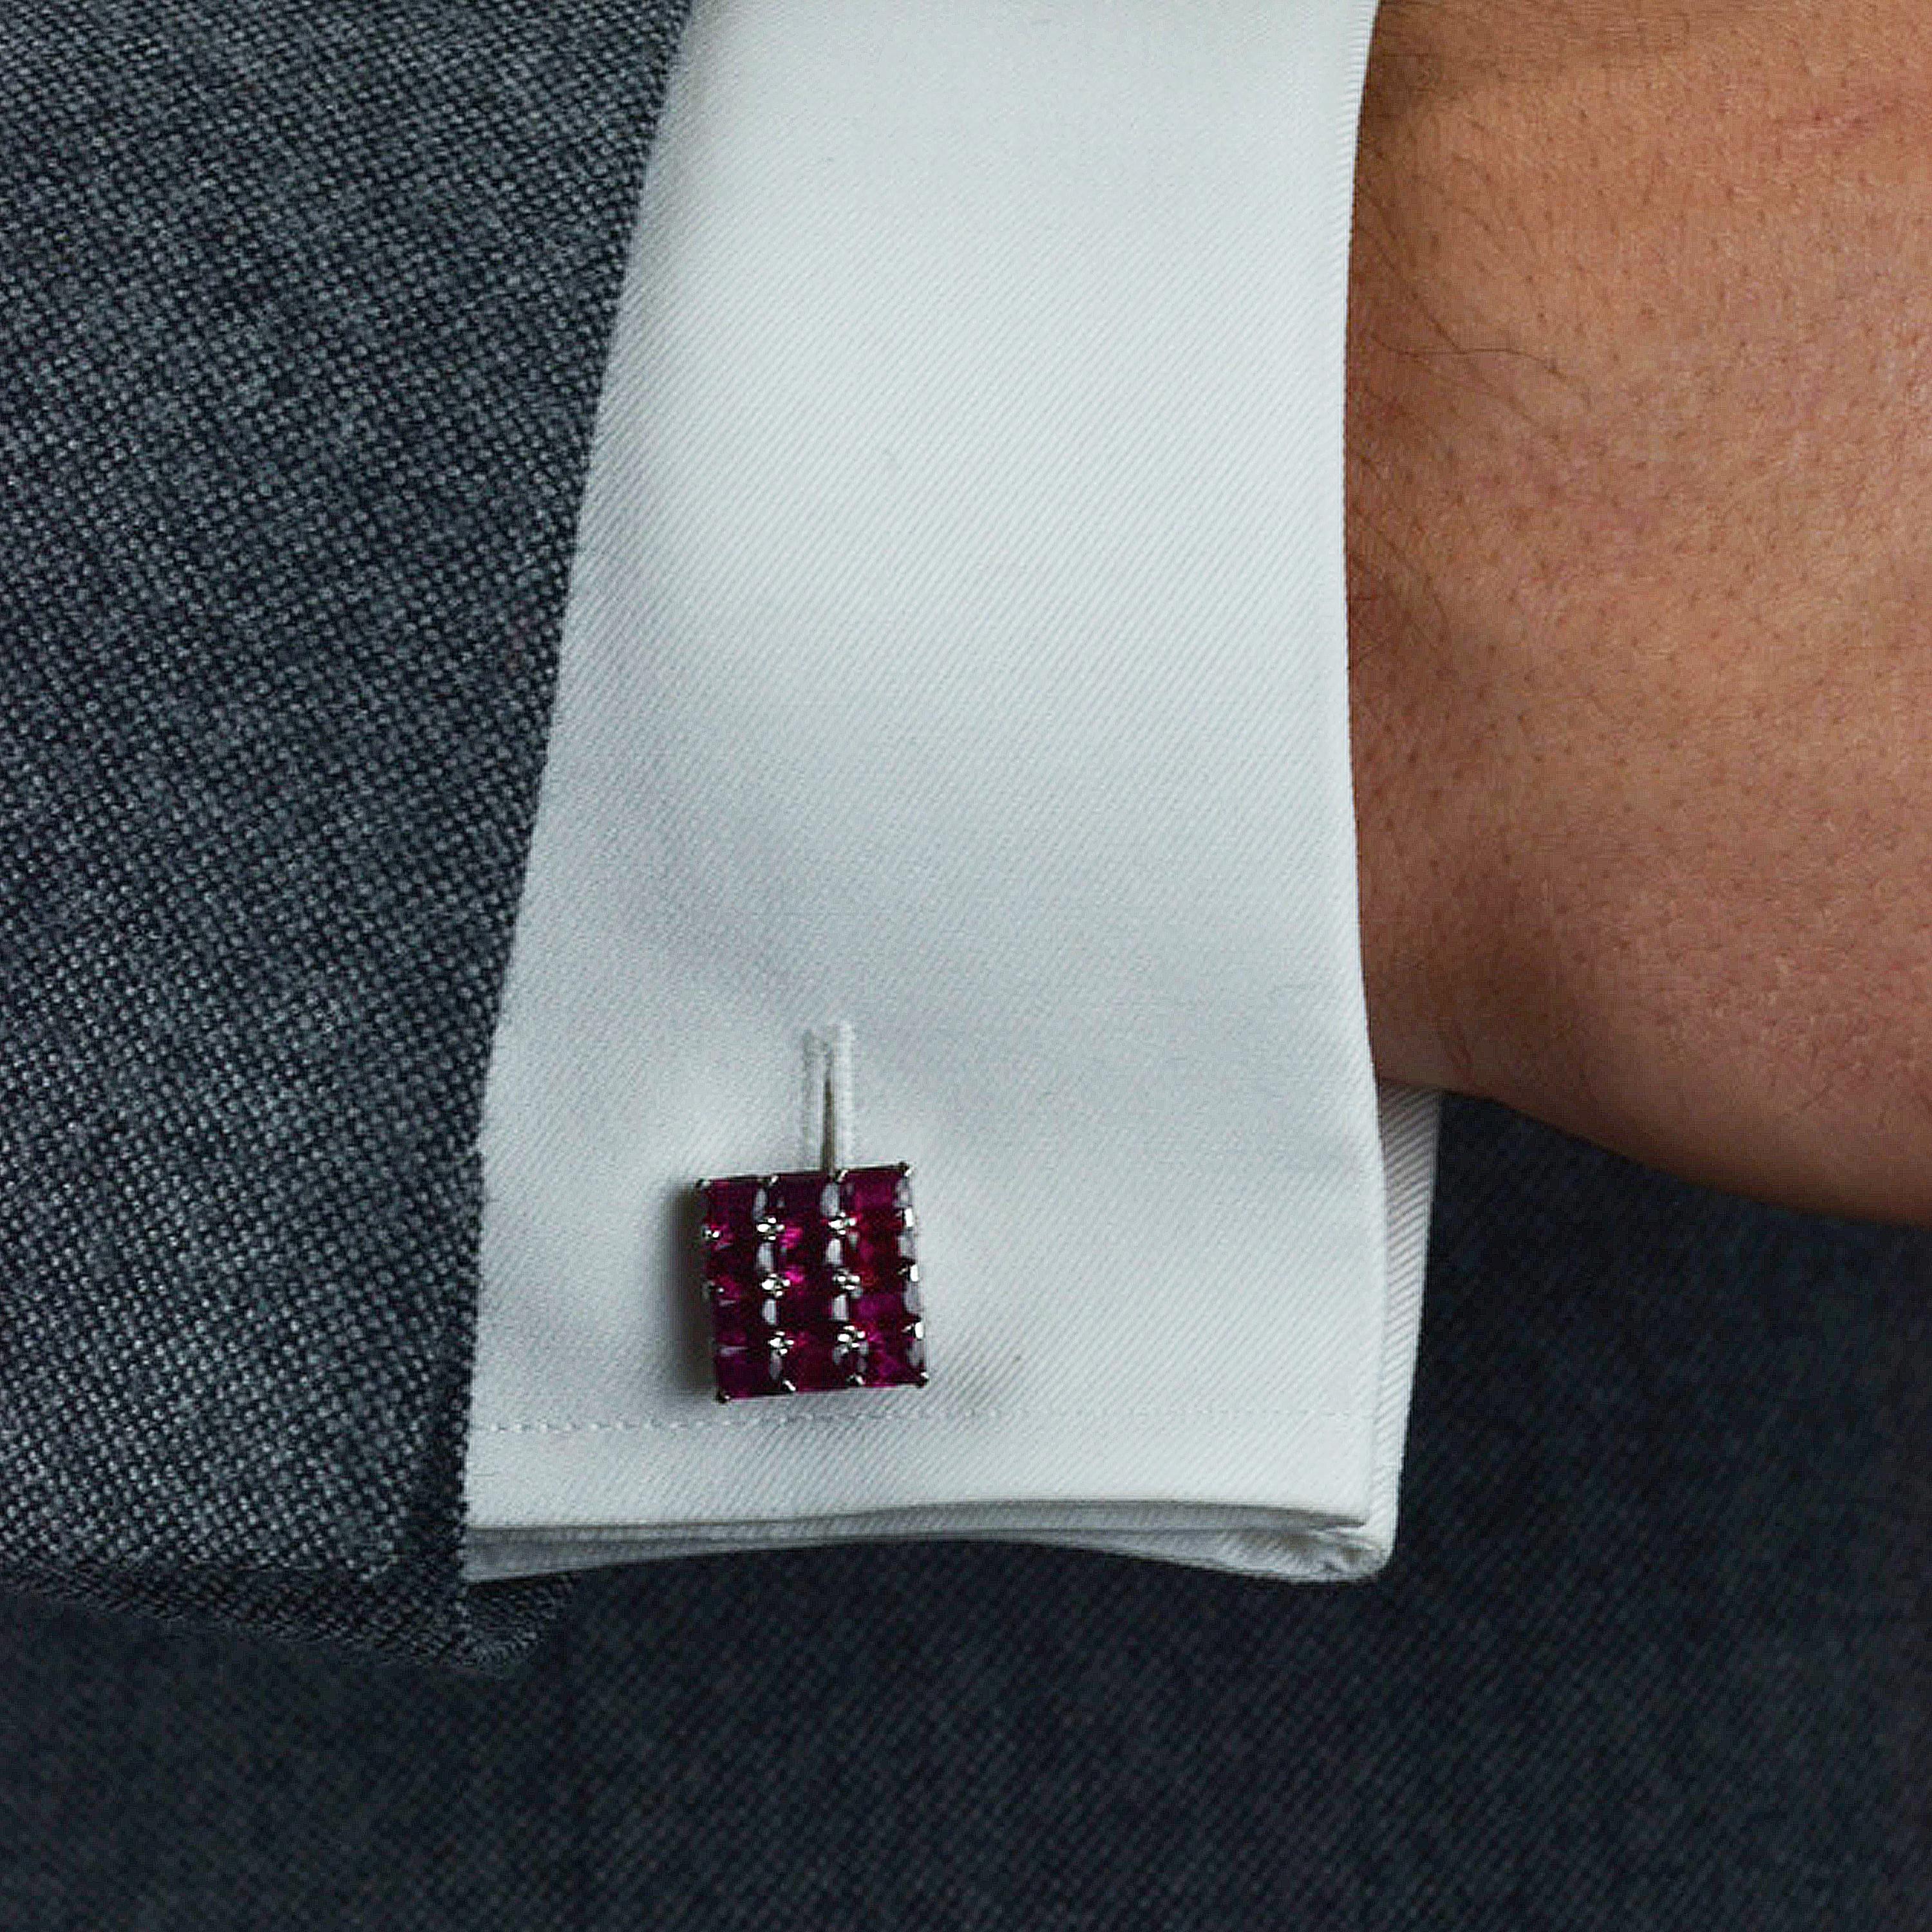 Matthew Cambery Hand made one of a kind bespoke Platinum Cufflinks set with beautifully matched rich red Emerald Cut Rubies totalling  11.00Carats. T Bar Fitting.

